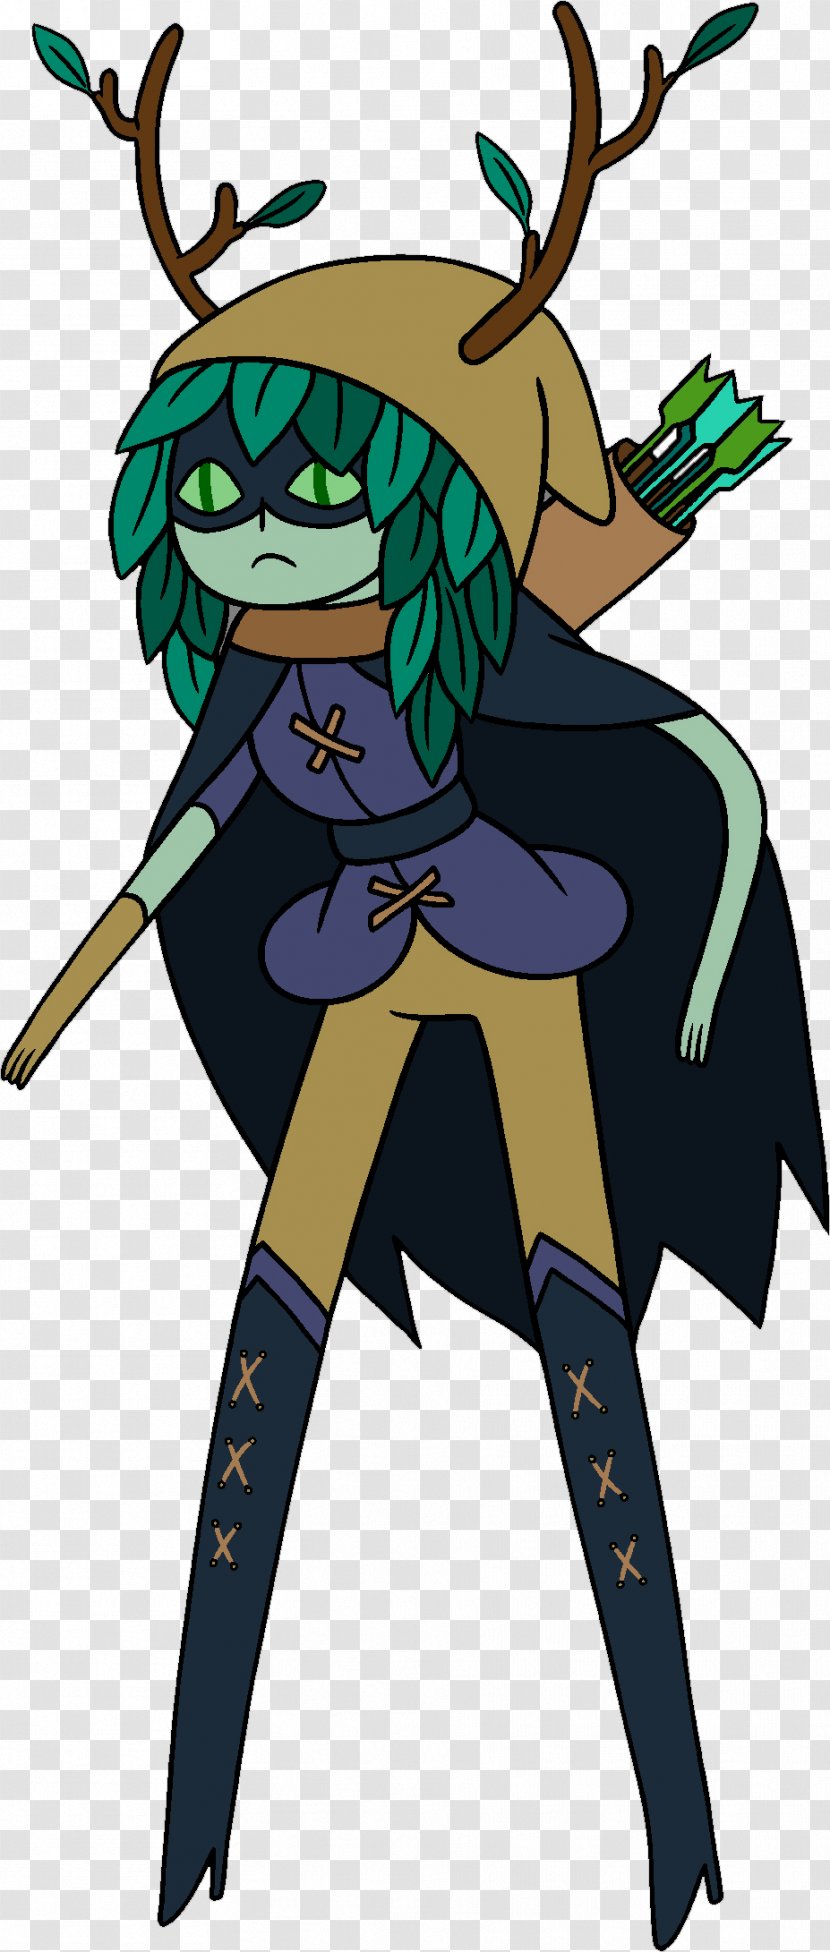 Ice King Huntress Wizard Character - Tree - Adventure Time Transparent PNG